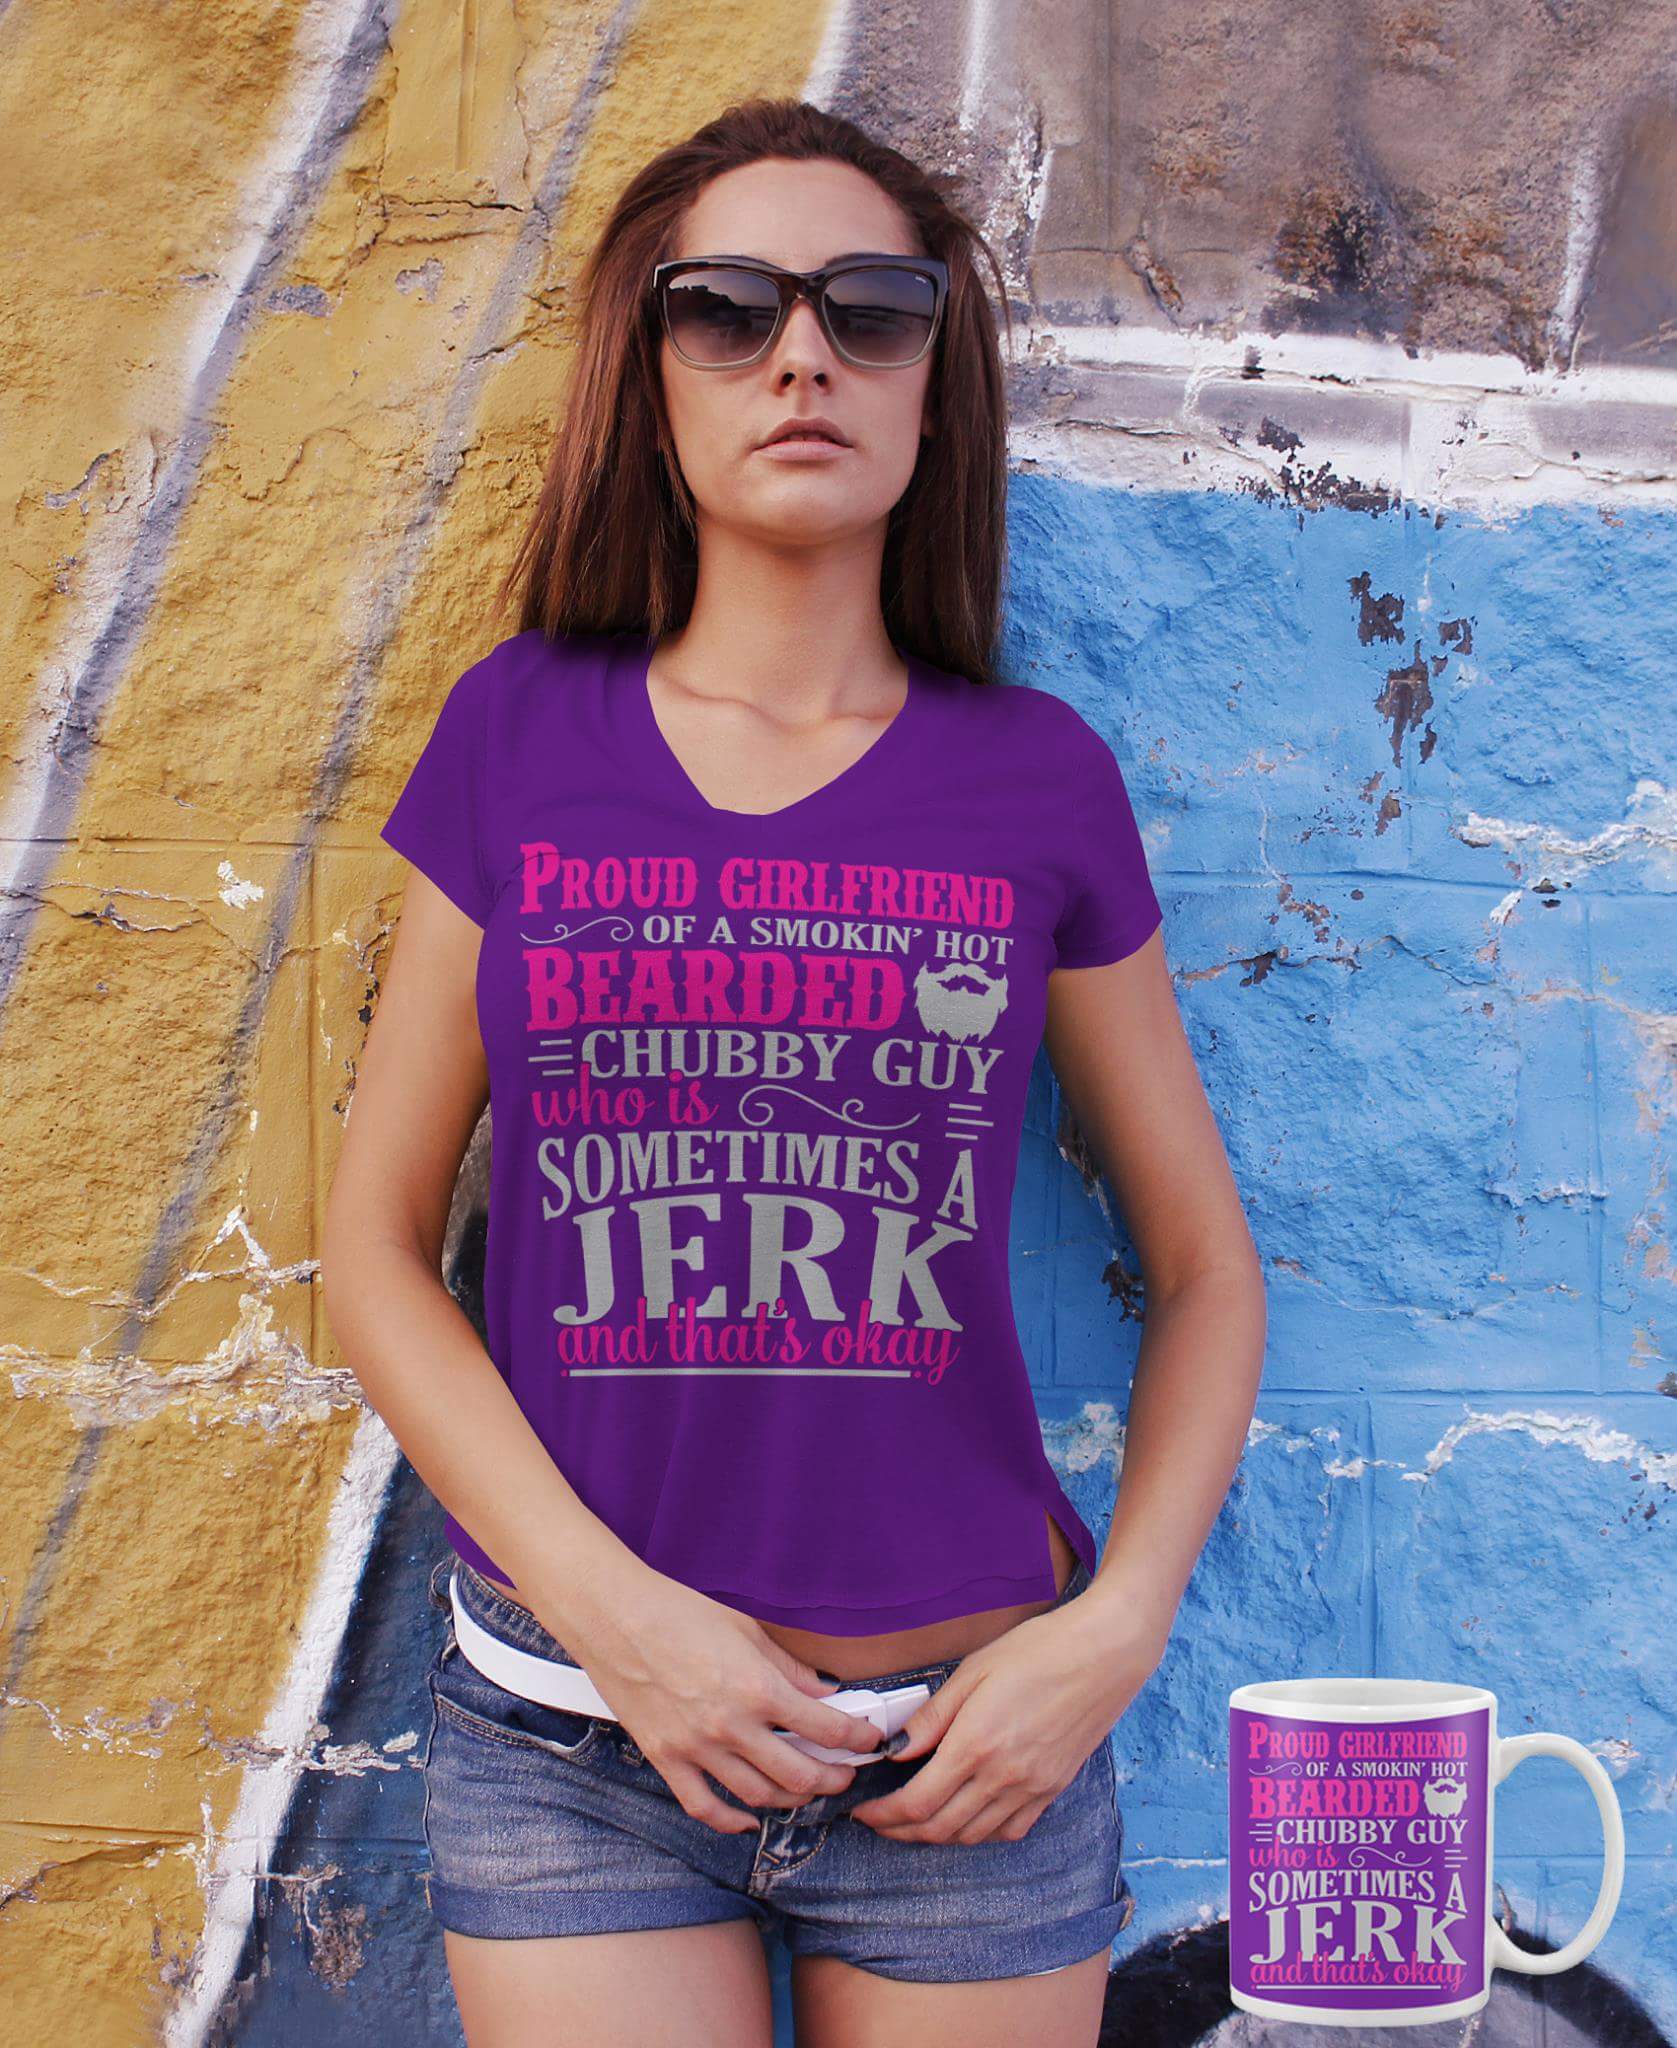 girl t shirt mockup psd - Of A Smokin' Hot Proud Girlfriend Rrrde Echubby Guy who woes Sometimes Jerk and that's okou Of A Smokin' Hot Proud Girlfriend Bharded Chubby Guy who is er Sometimes A Jerk and thats okay